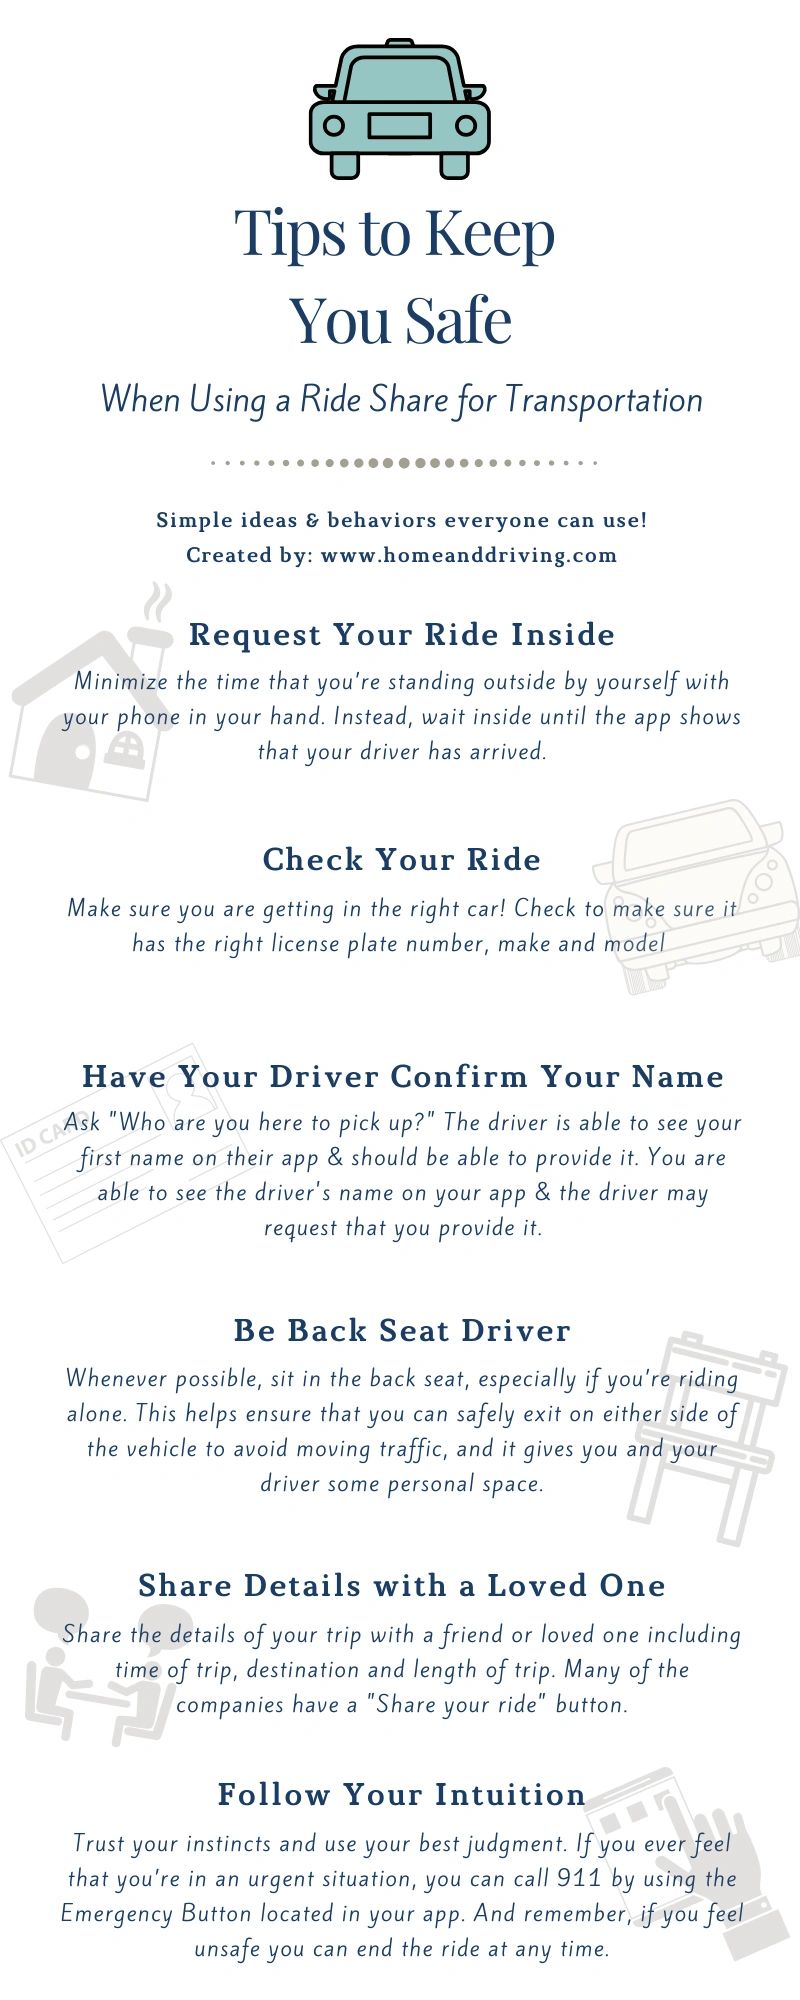 https://img1.wsimg.com/isteam/ip/7497f338-0c45-42fe-991c-56e4e6807ba2/rideshare%20101%20tips%20to%20keep%20you%20safe%20blog.png